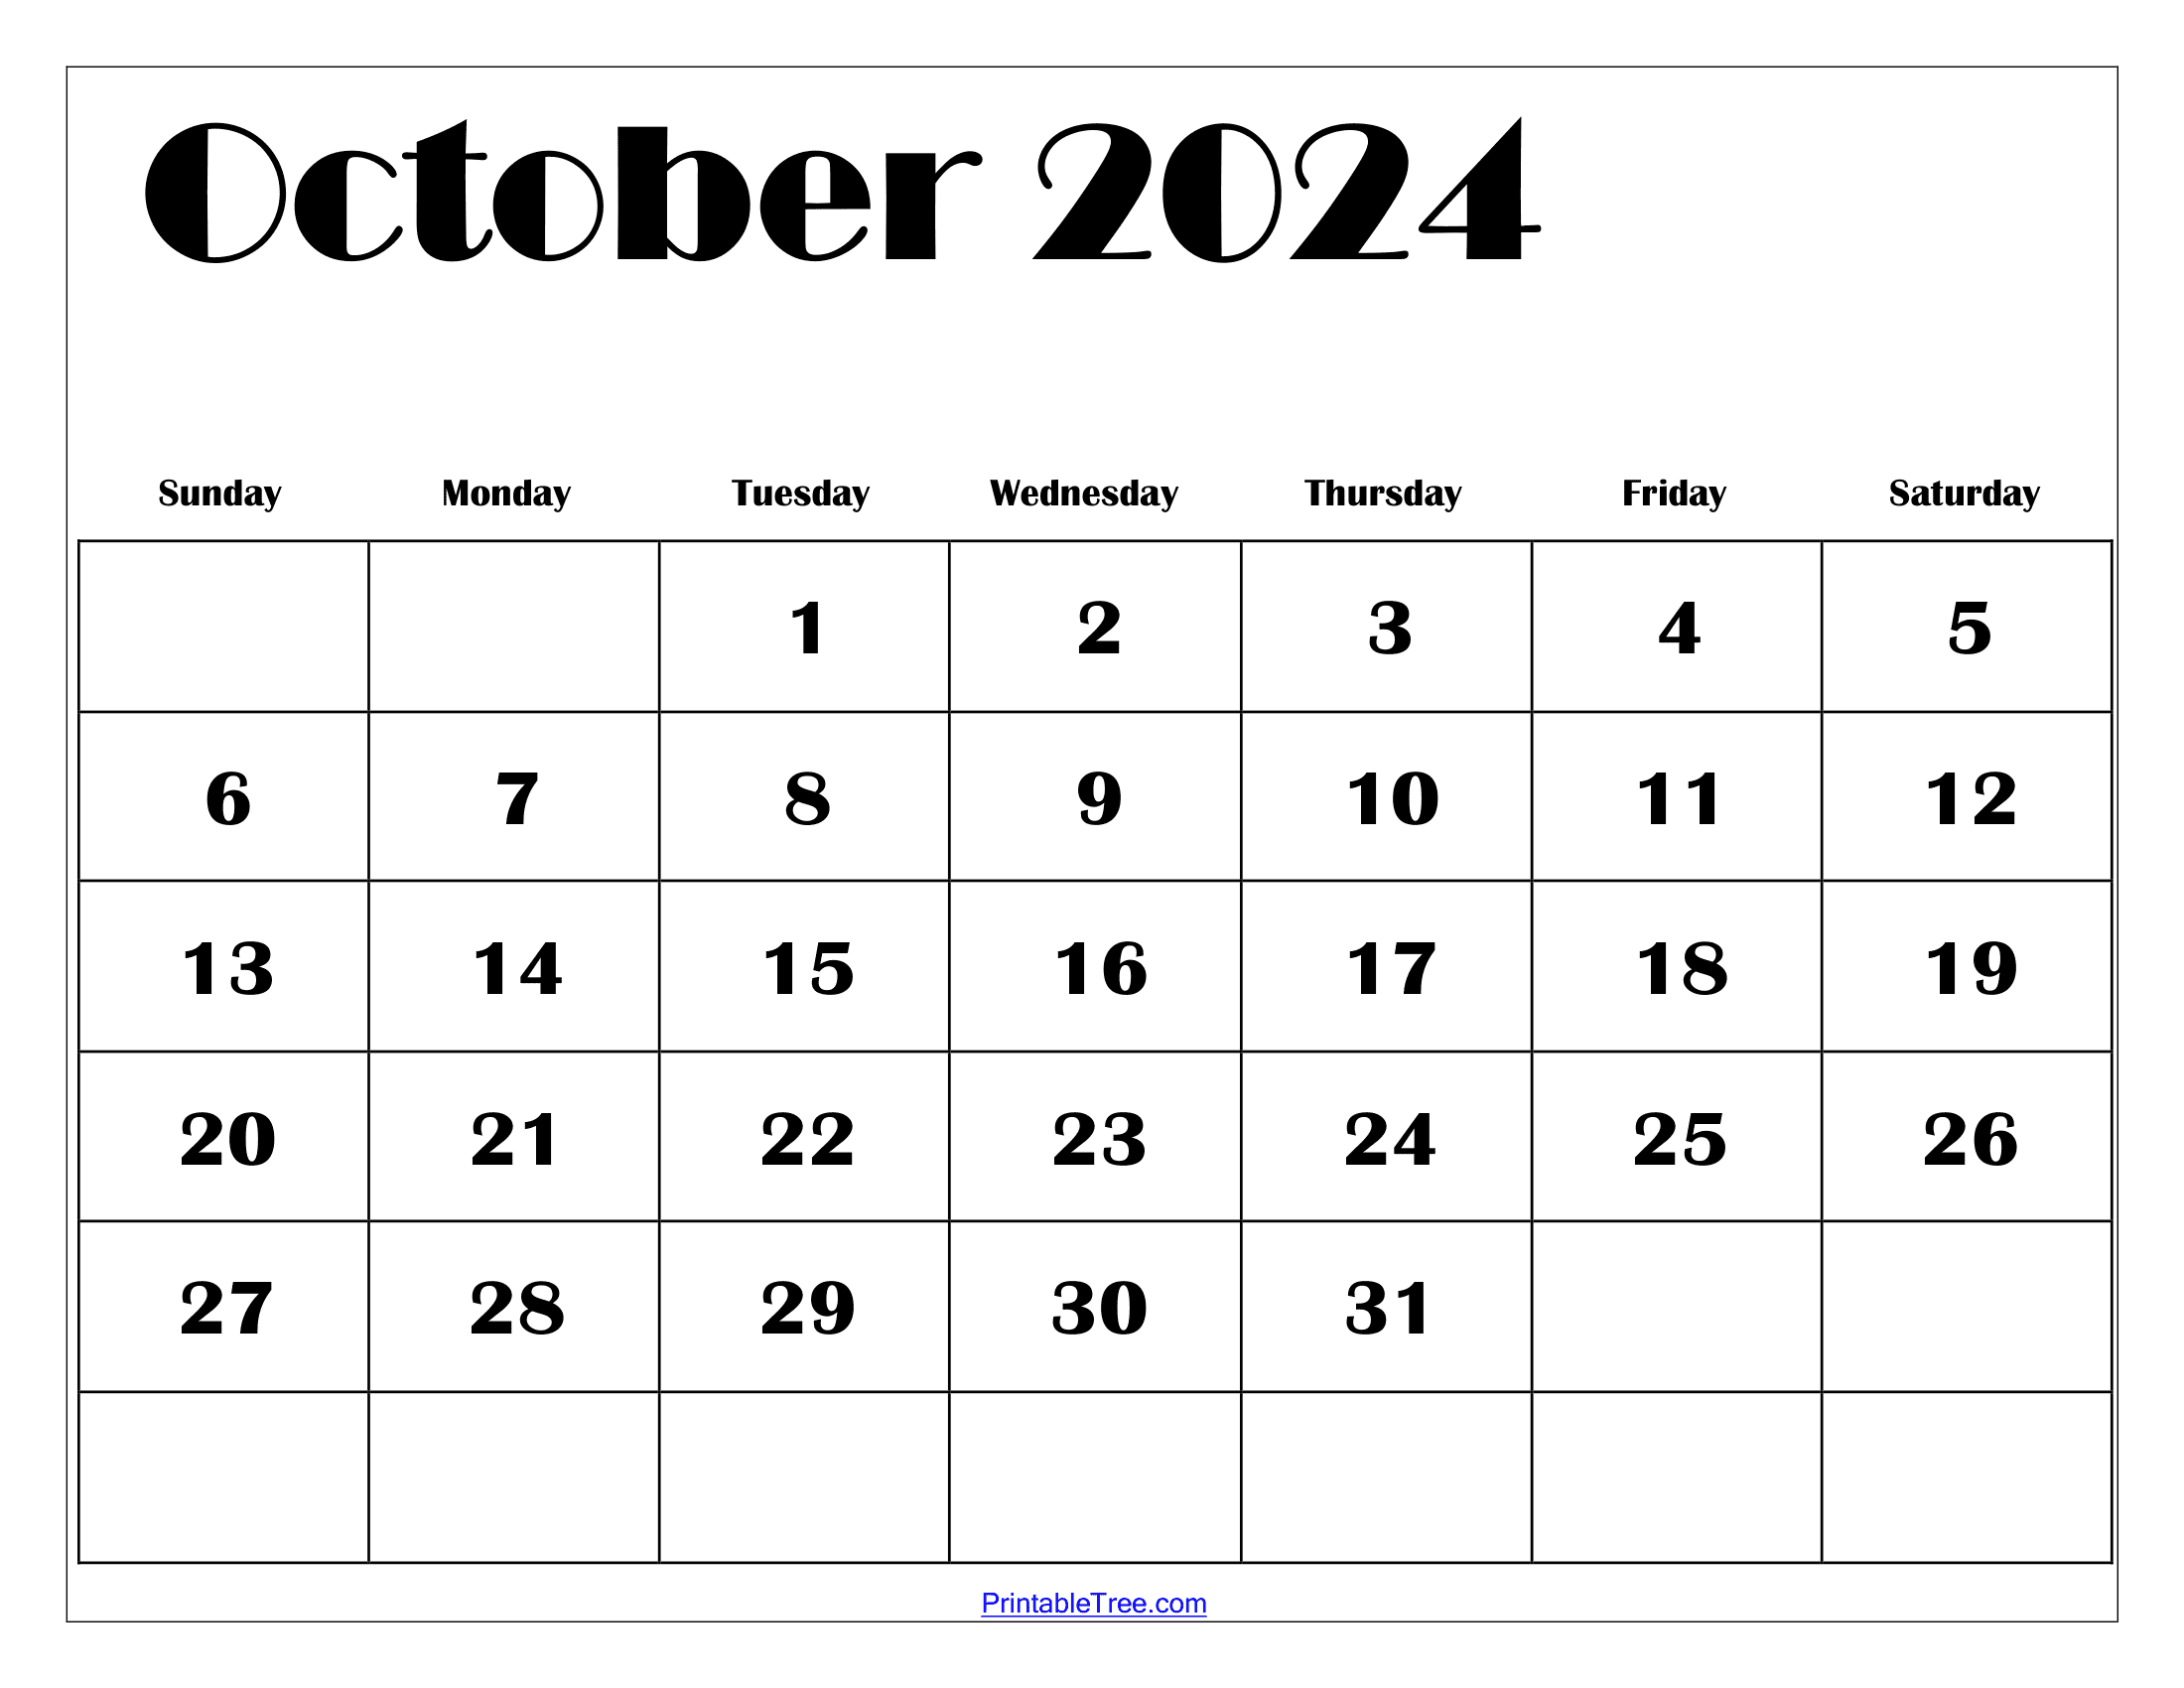 Printable October 2024 Calendar With Holidays Free Printable - Free Printable 2024 October Calendar With Holidays